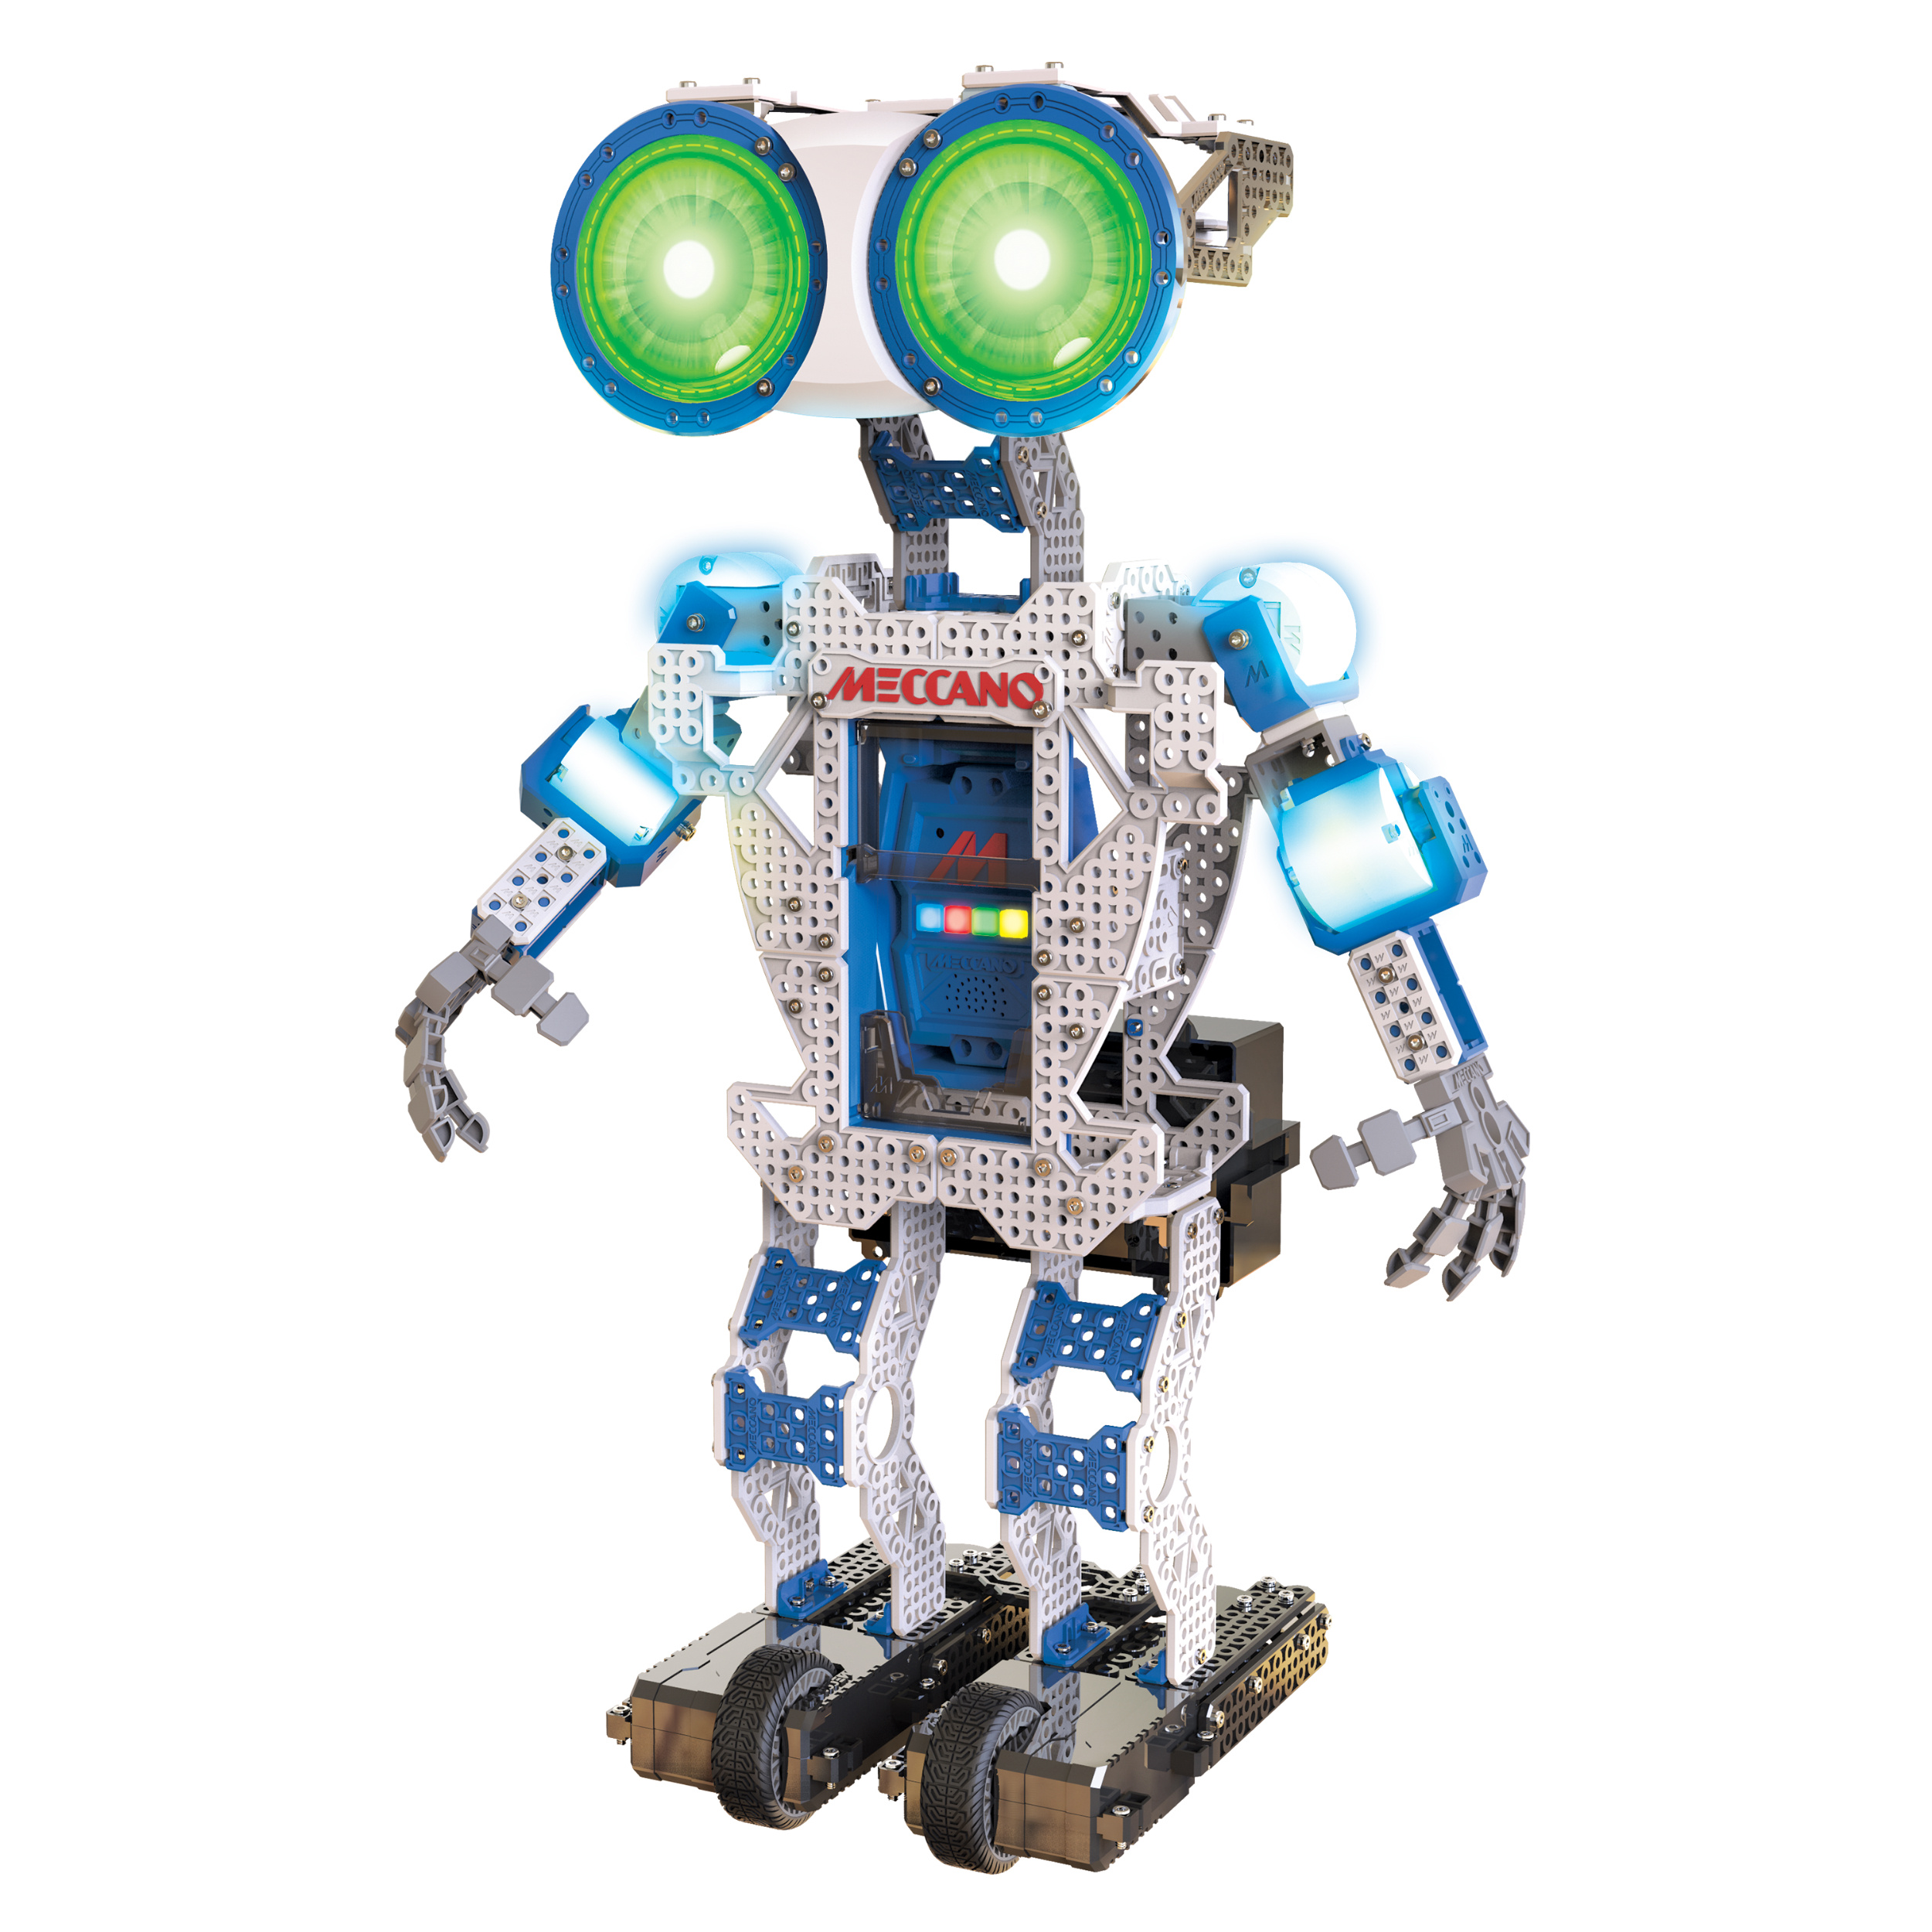 Meccano by Erector, Meccanoid 2.0 Robot-Building Kit STEM Engineering Education Toy - image 2 of 8